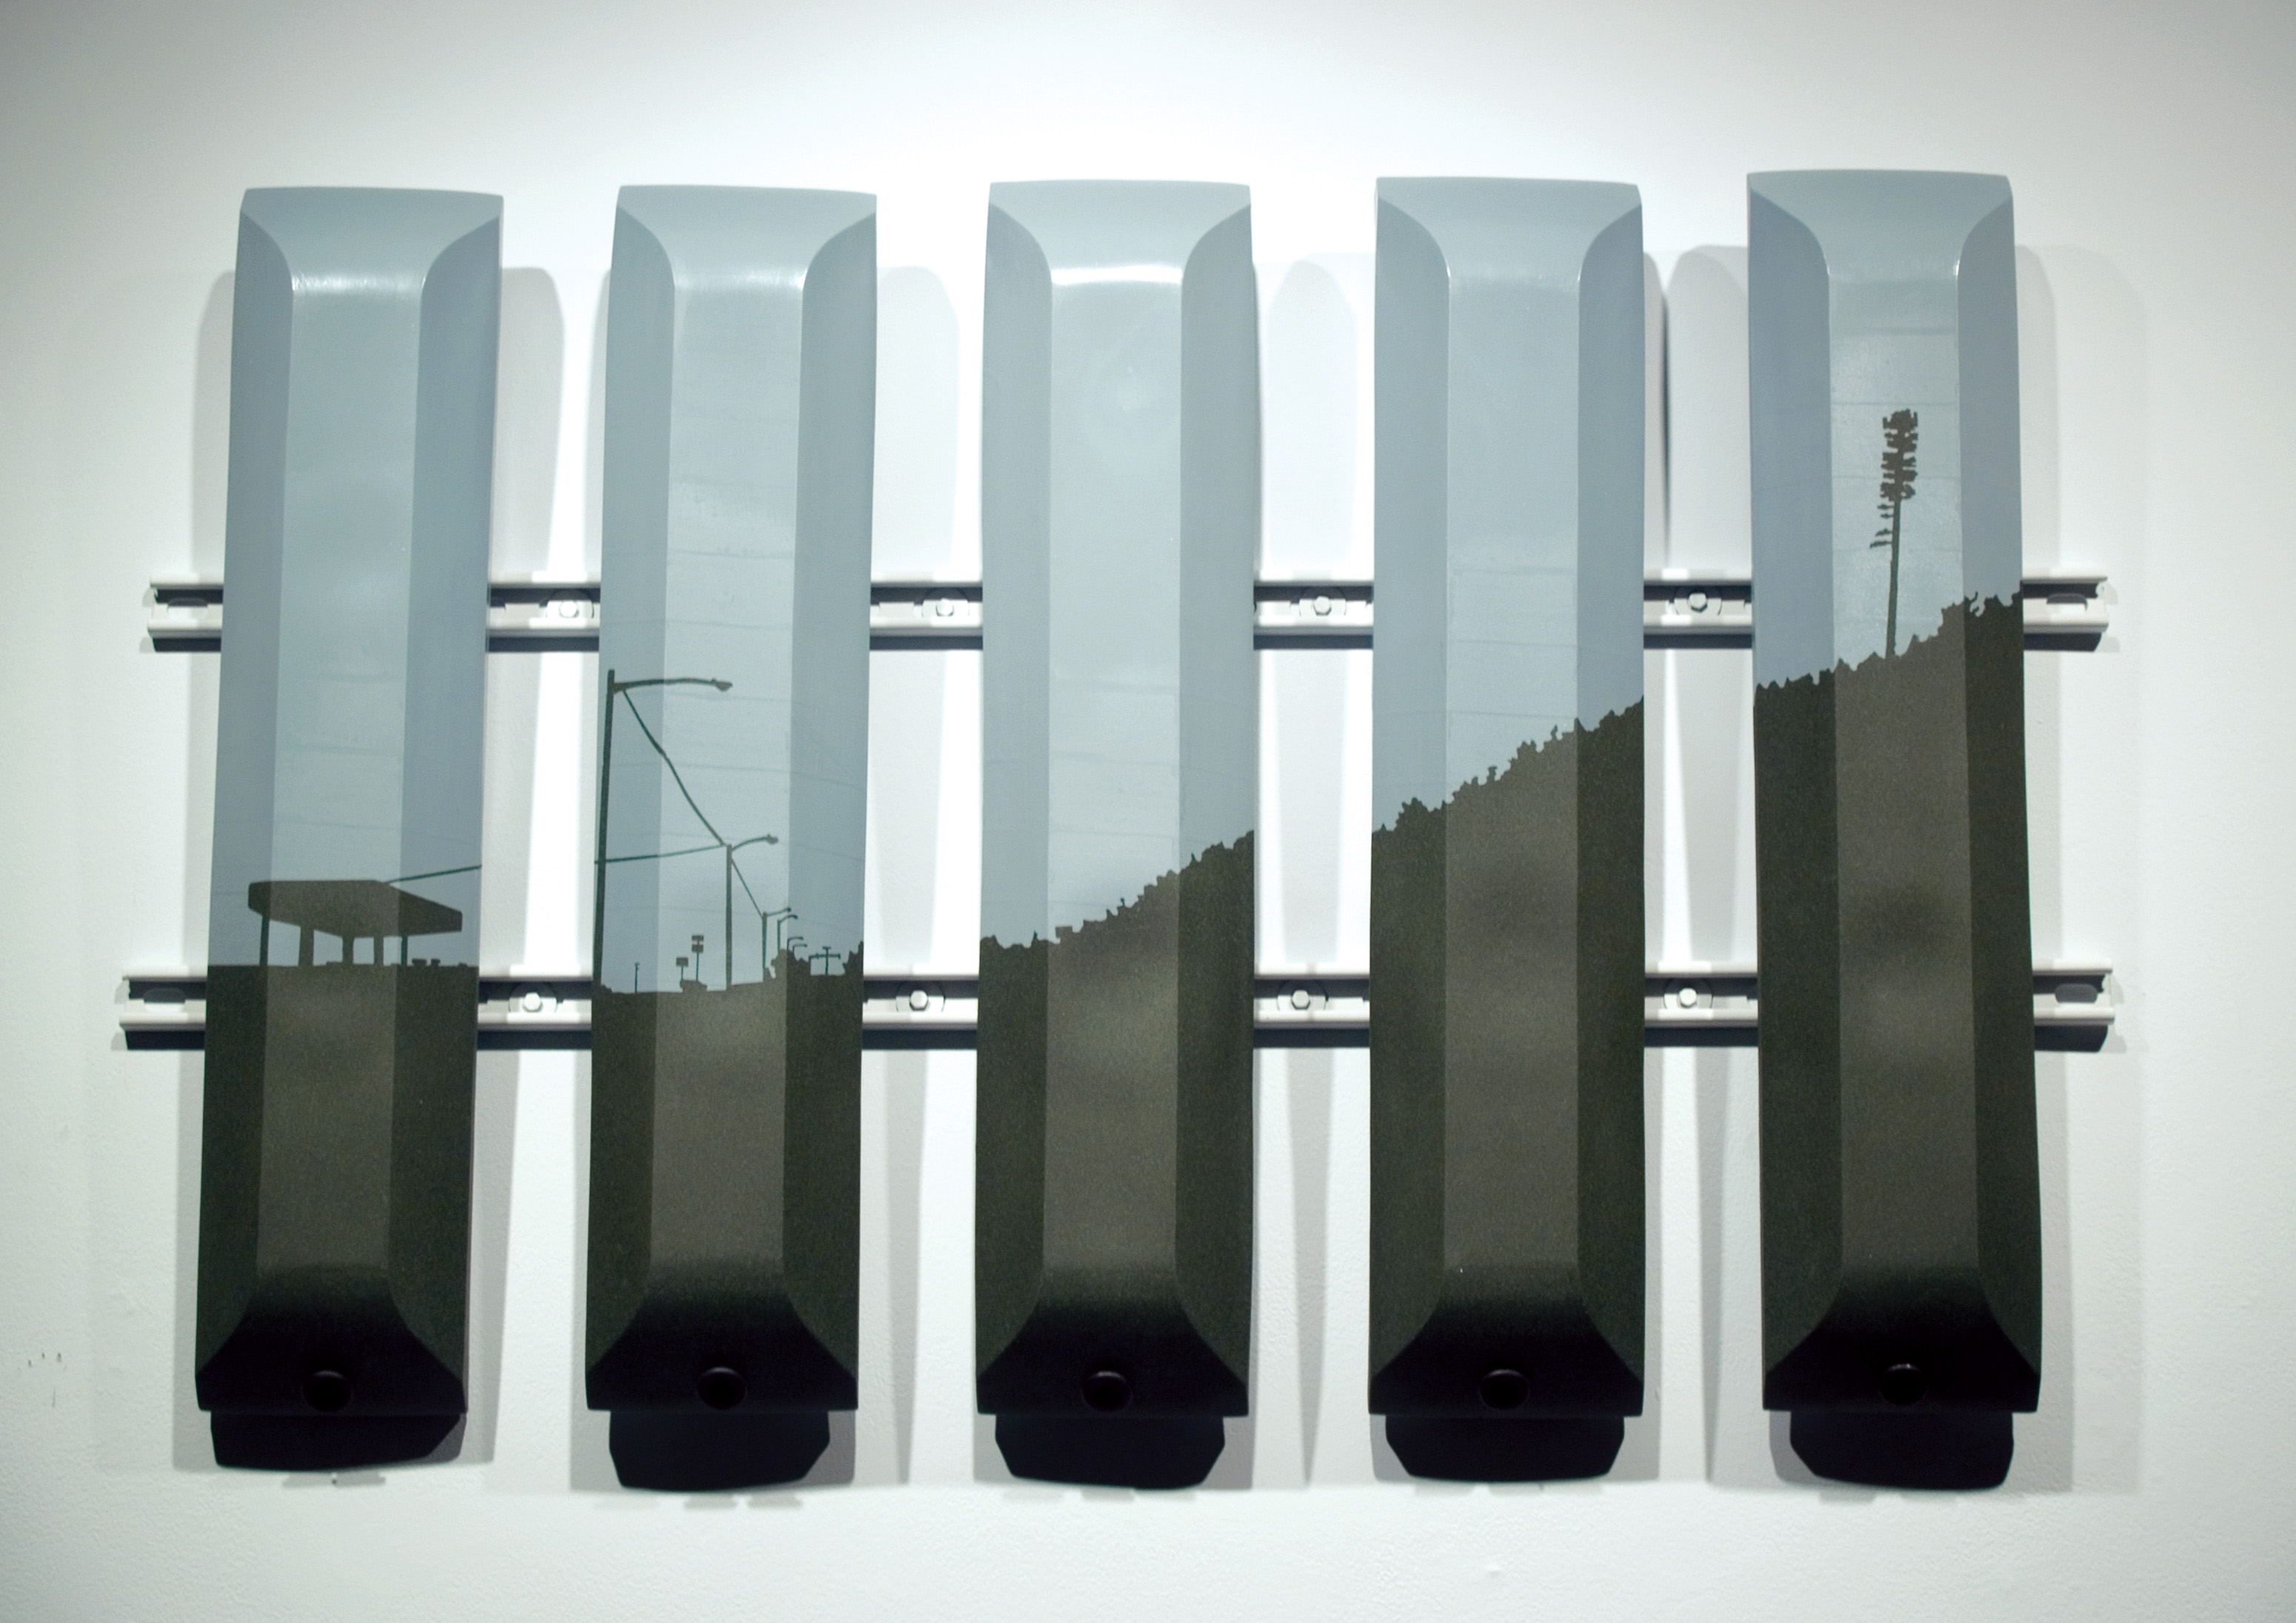 How Many Bars Do You Have?, 5 ft. (1.5 m) in length, porcelain, steel, rubber, paint, 2009.